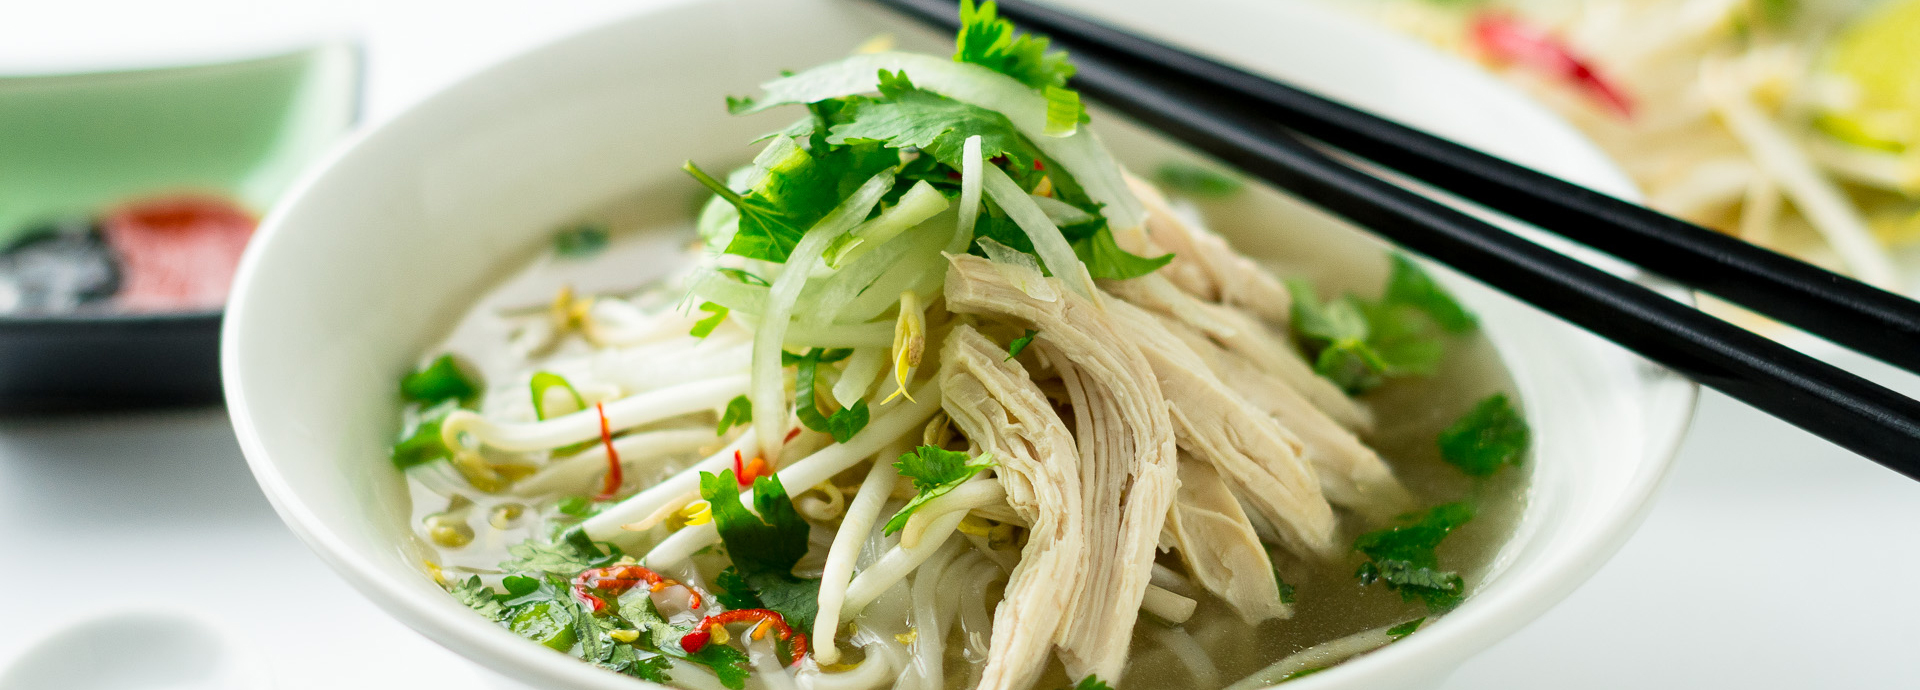 Pho noodles - Tour Packages and Vacation | Ancient Orient Journeys